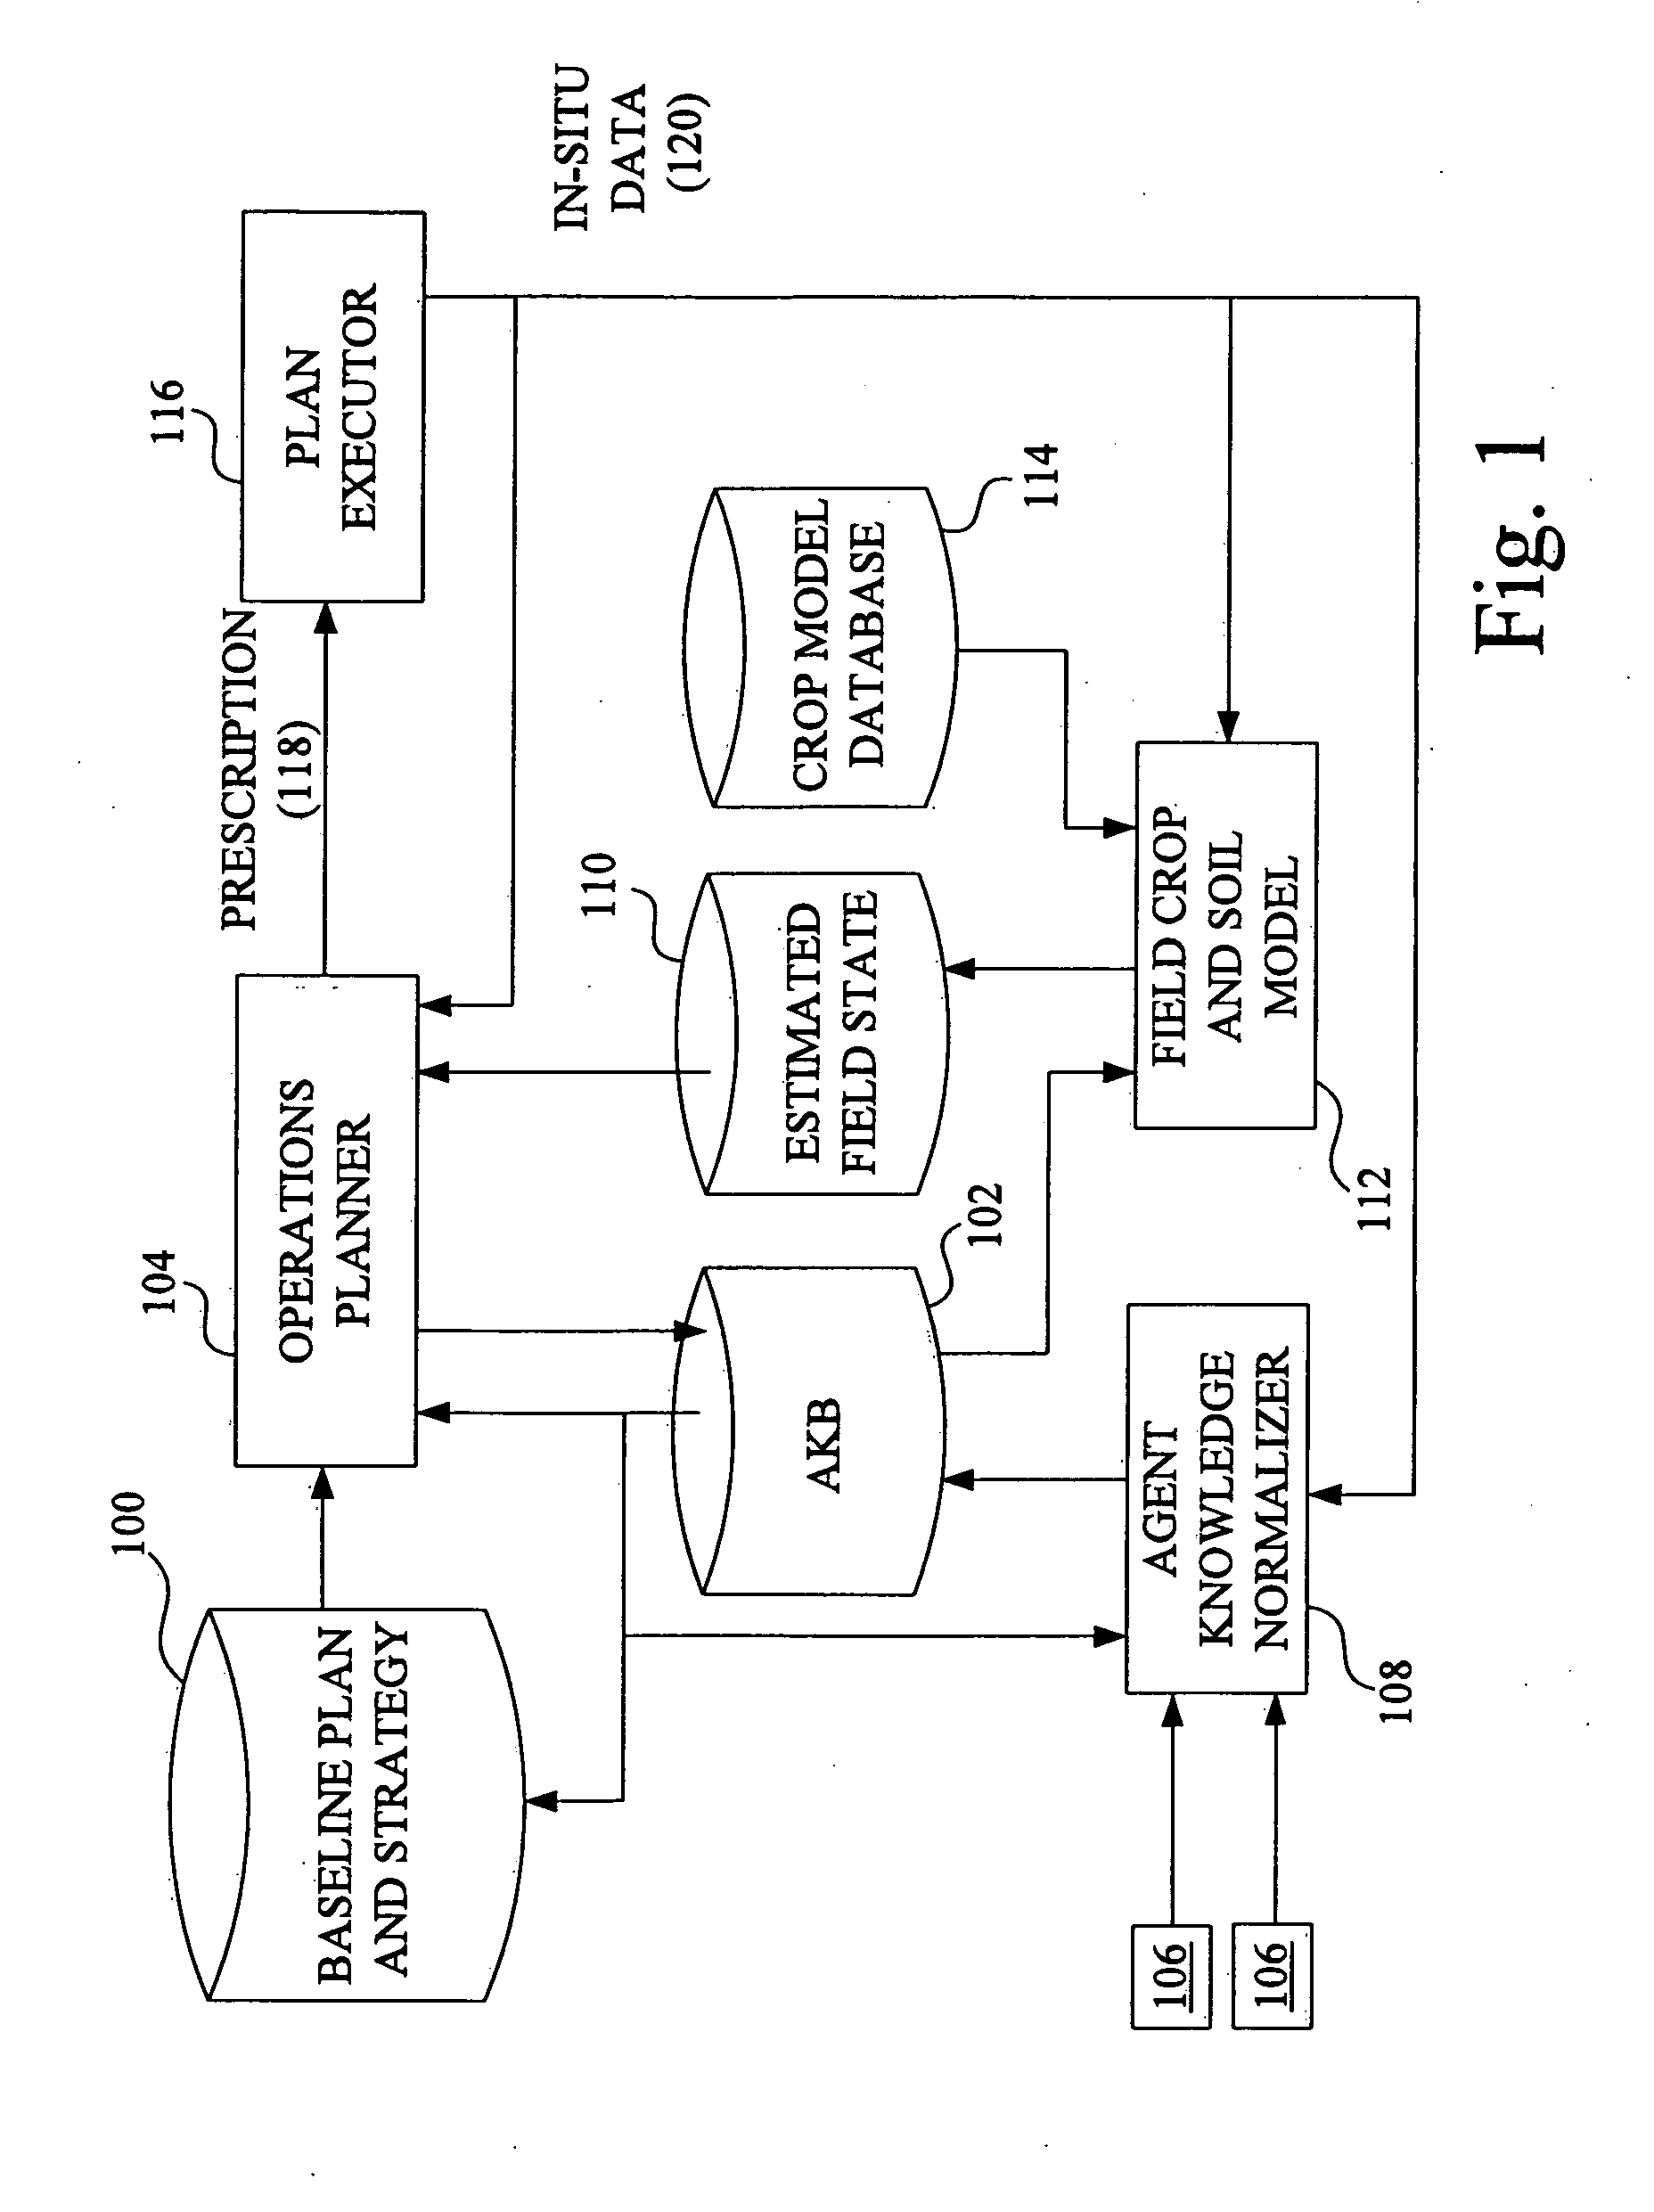 Method of performing an agricultural work operation using real time prescription adjustment